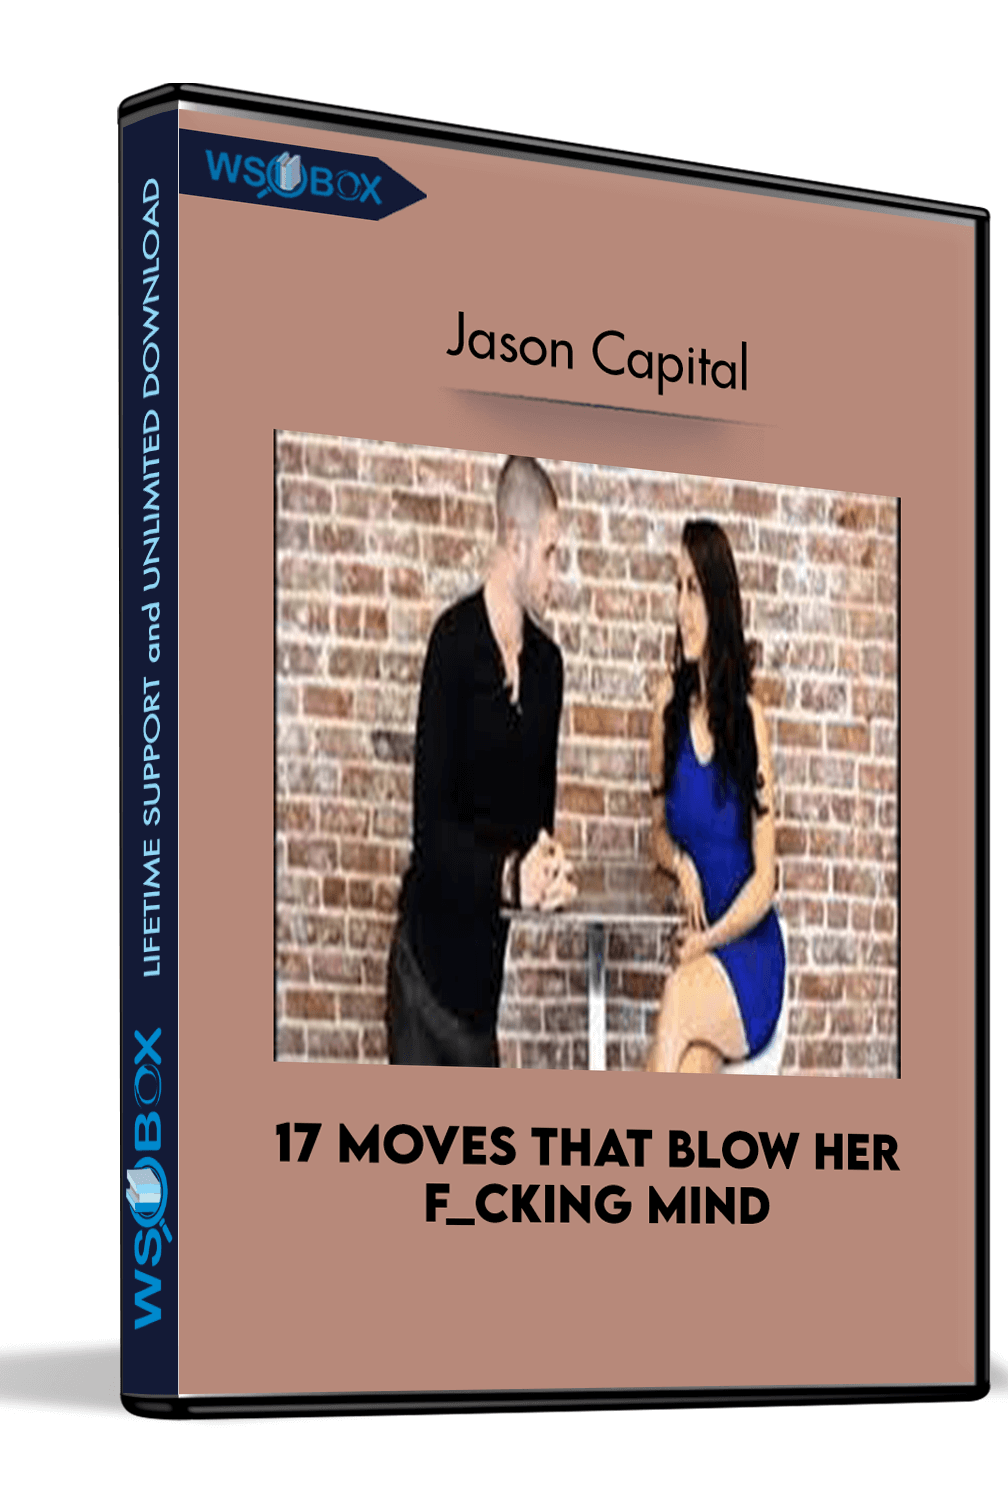 17-moves-that-blow-her-f_cking-mind-jason-capital